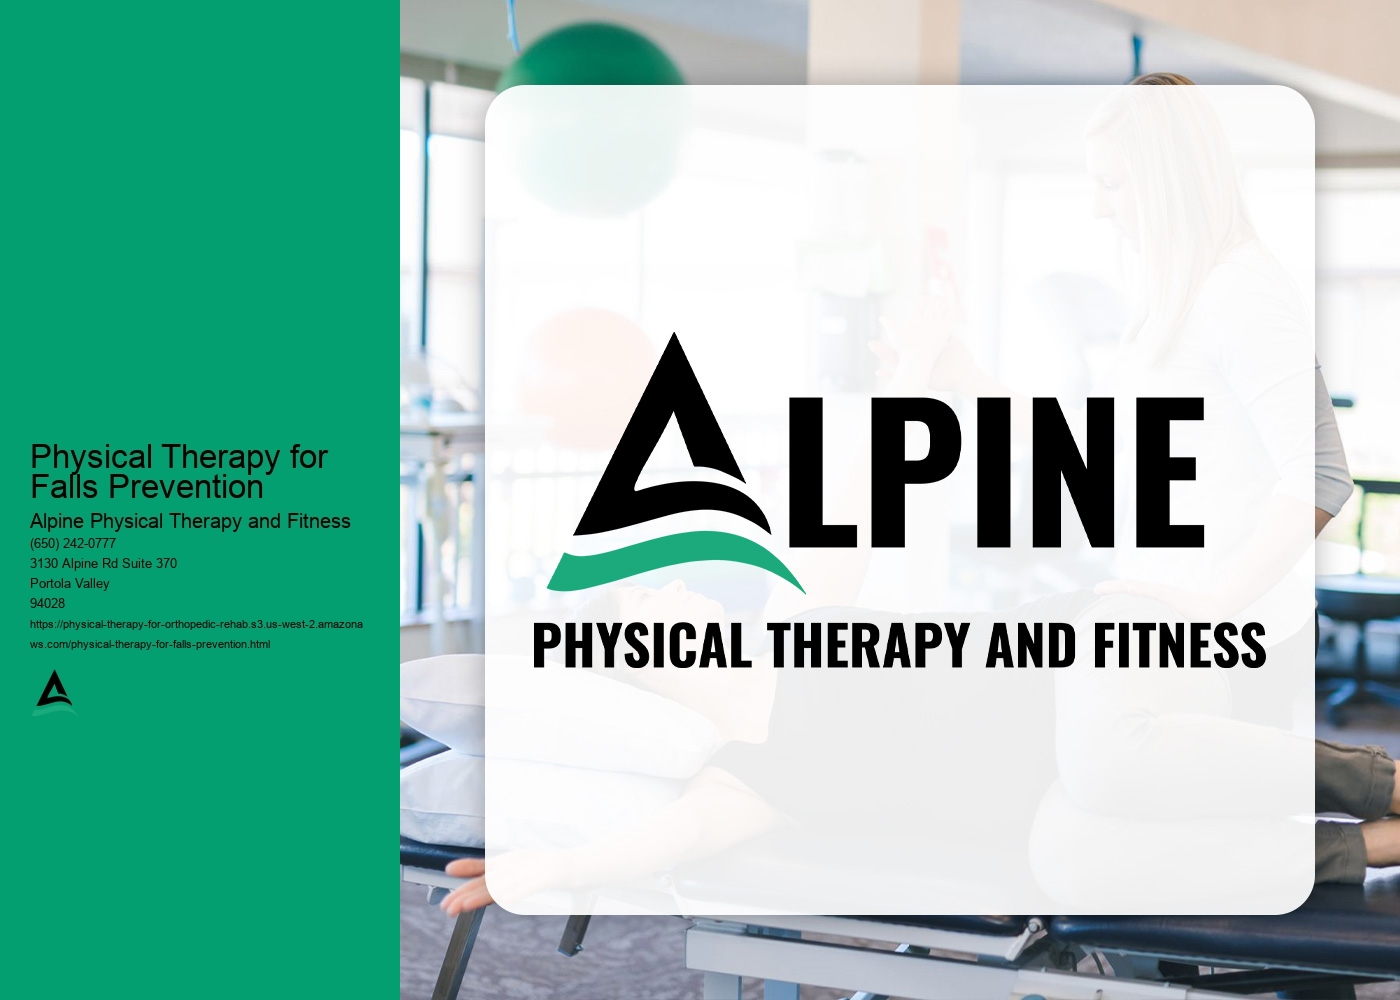 Are there any additional resources or support networks that physical therapists can connect patients with to further enhance falls prevention efforts?